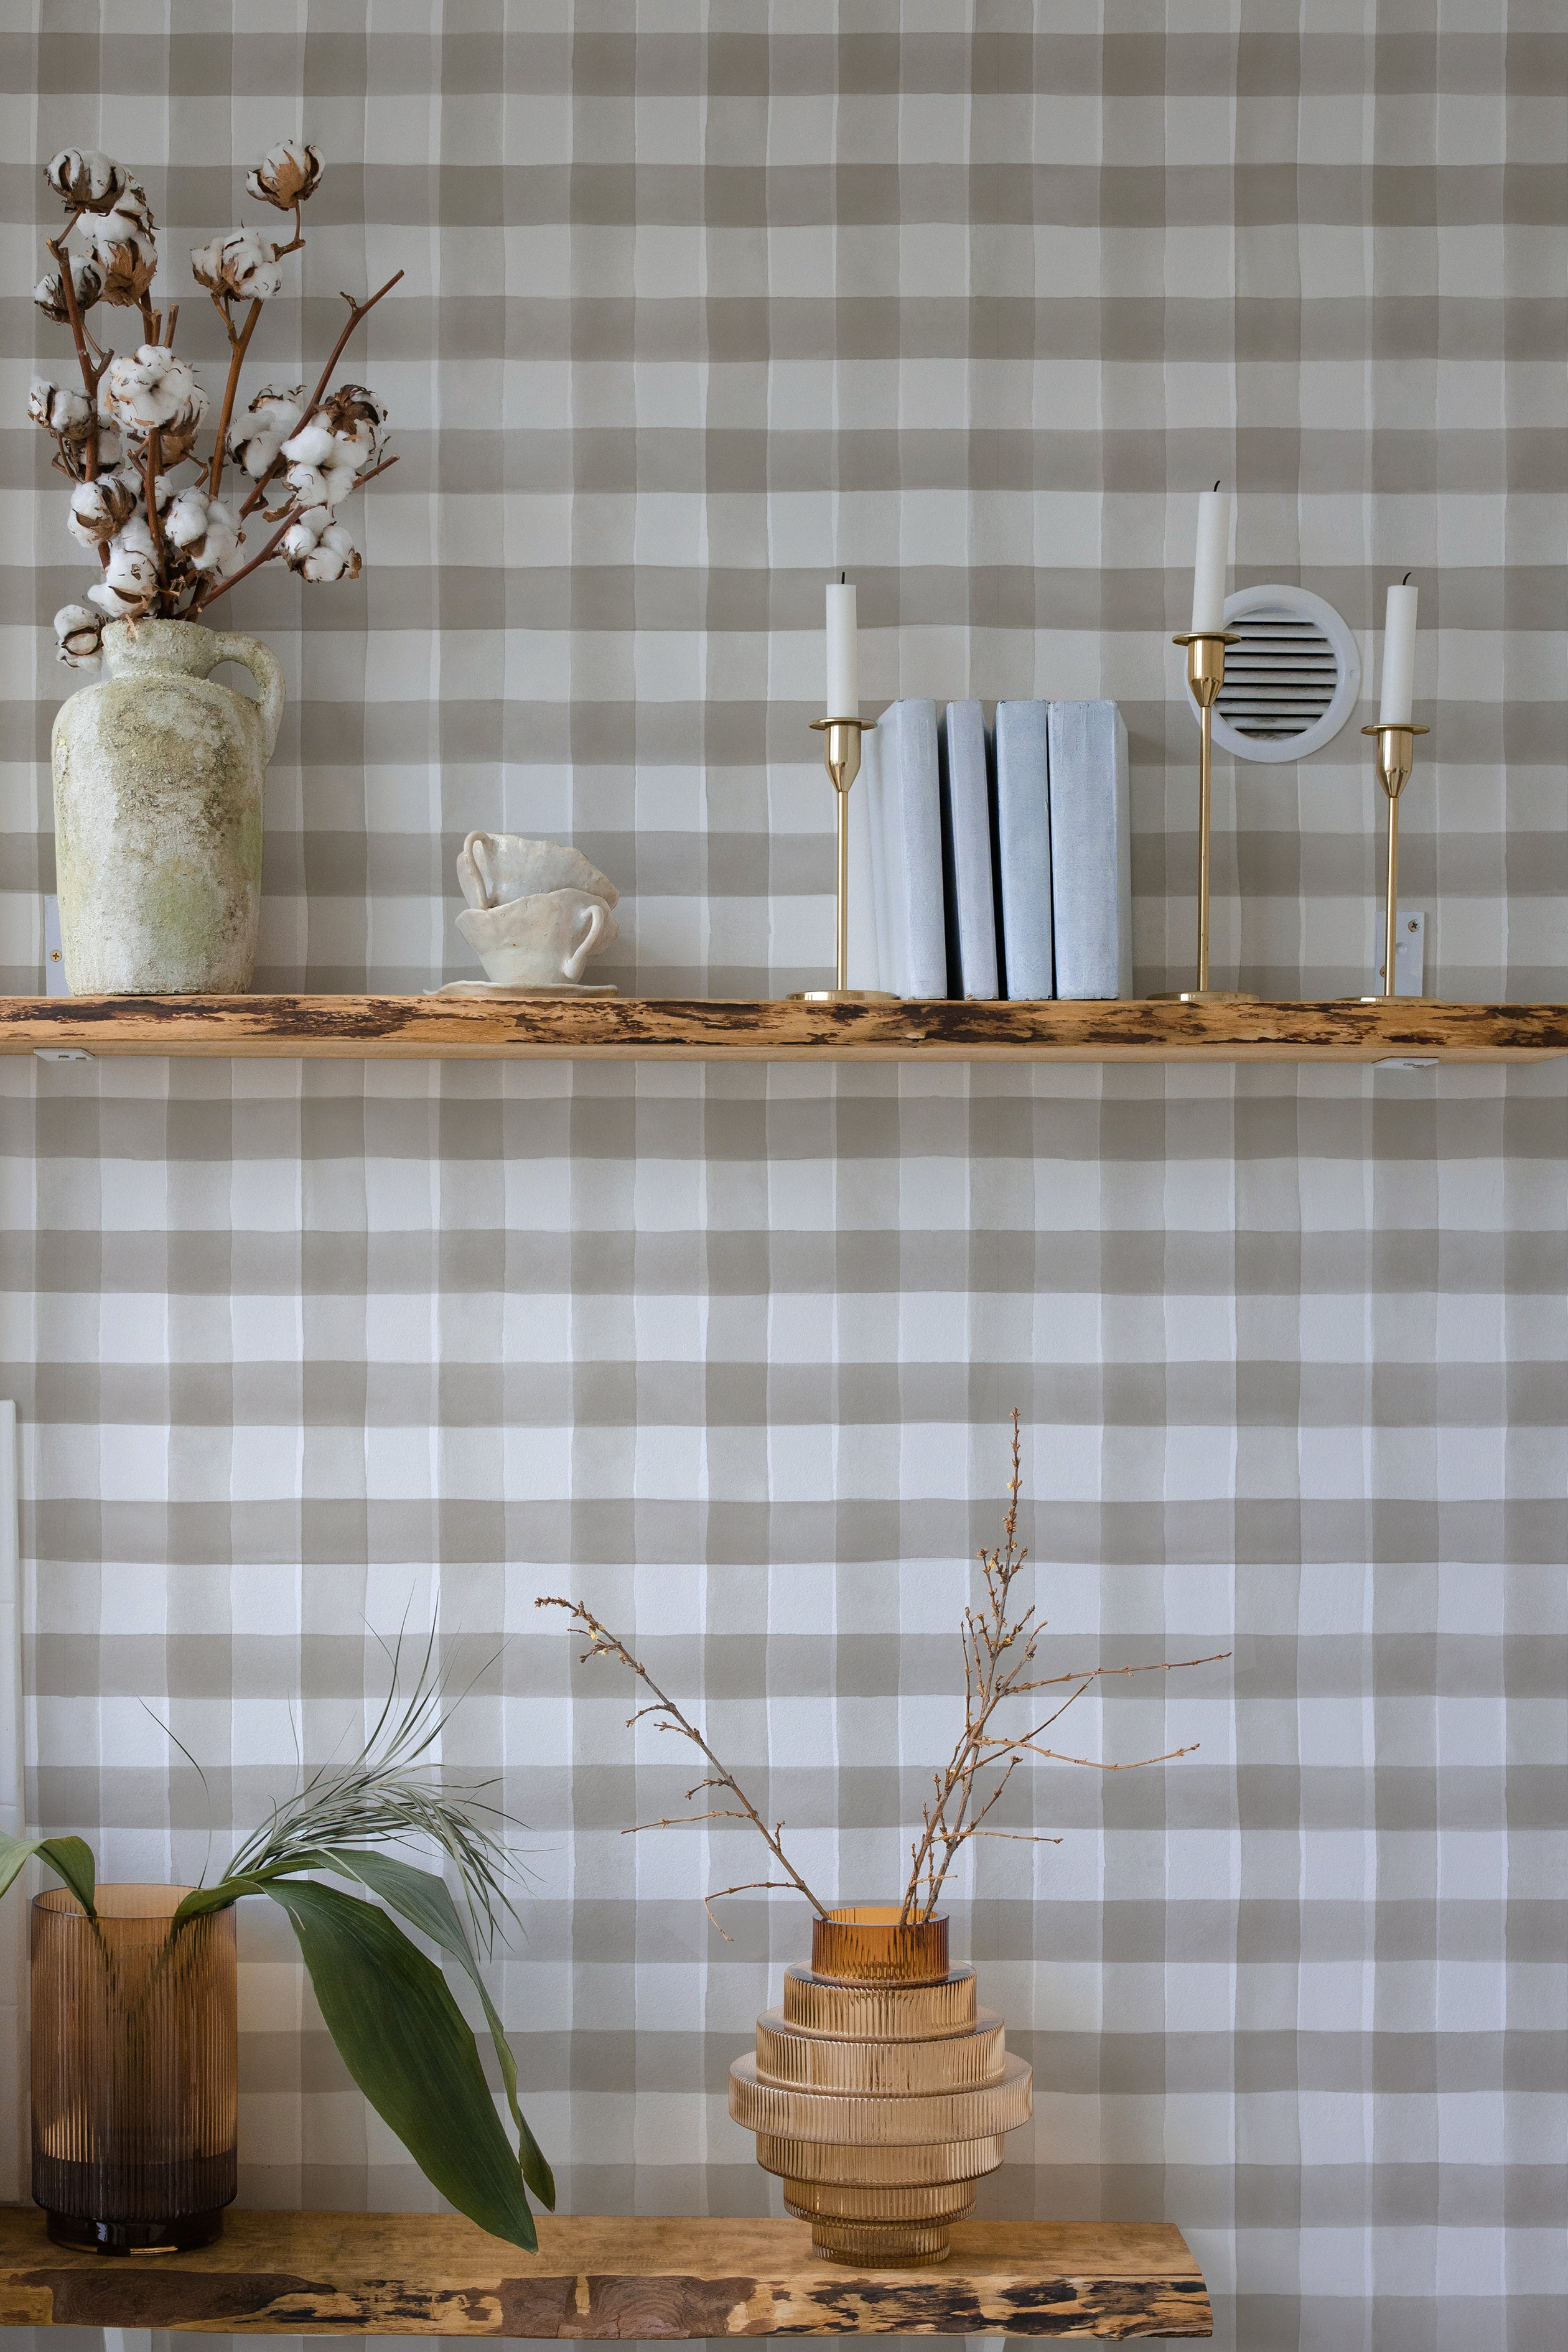 An alternate decor setup using the same Cuadro de Búfalo wallpaper, now in a stylish grey and white buffalo check pattern. The scene is accented with rustic decor elements like a wooden shelf holding a vase with dried branches and candle holders.